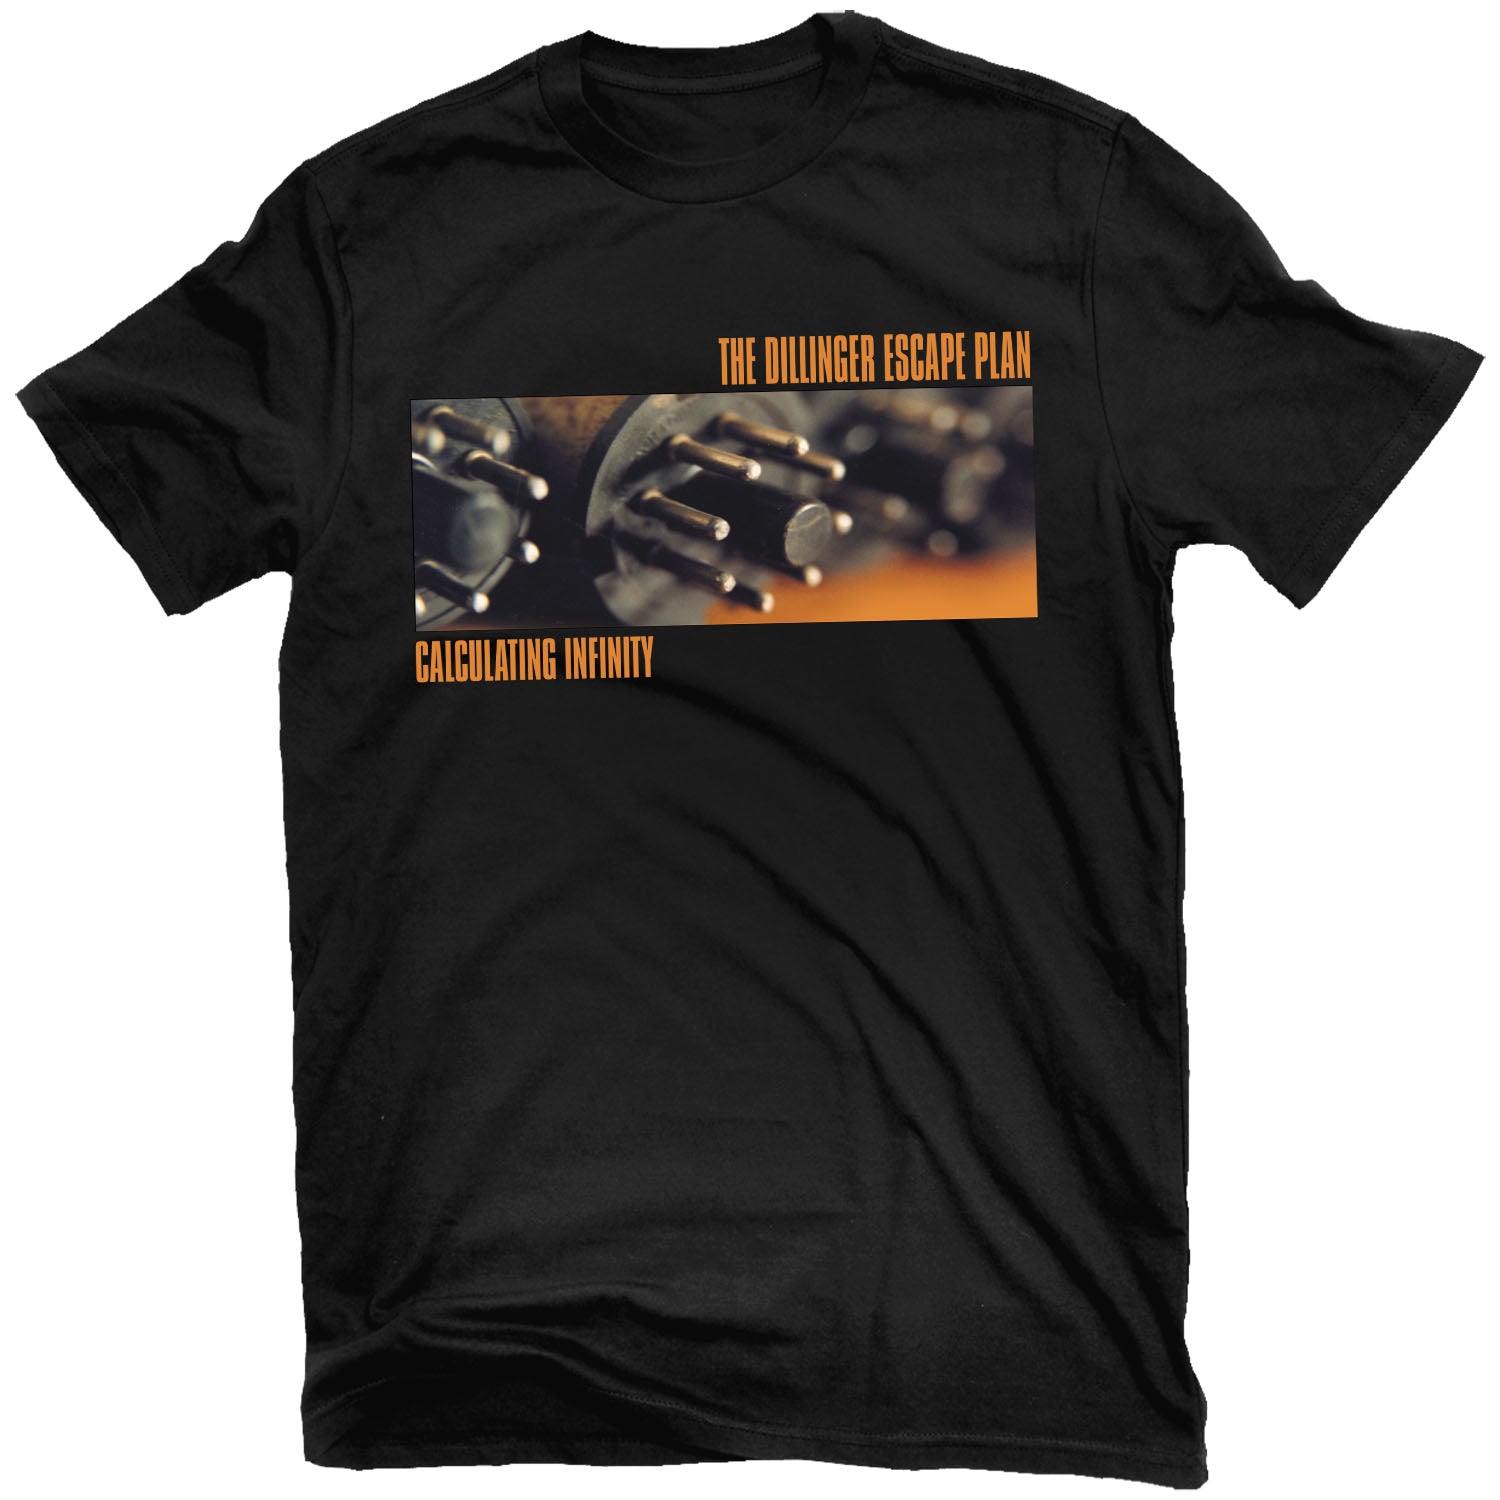 The Dillinger Escape Plan "Calculating Infinity" T-Shirt